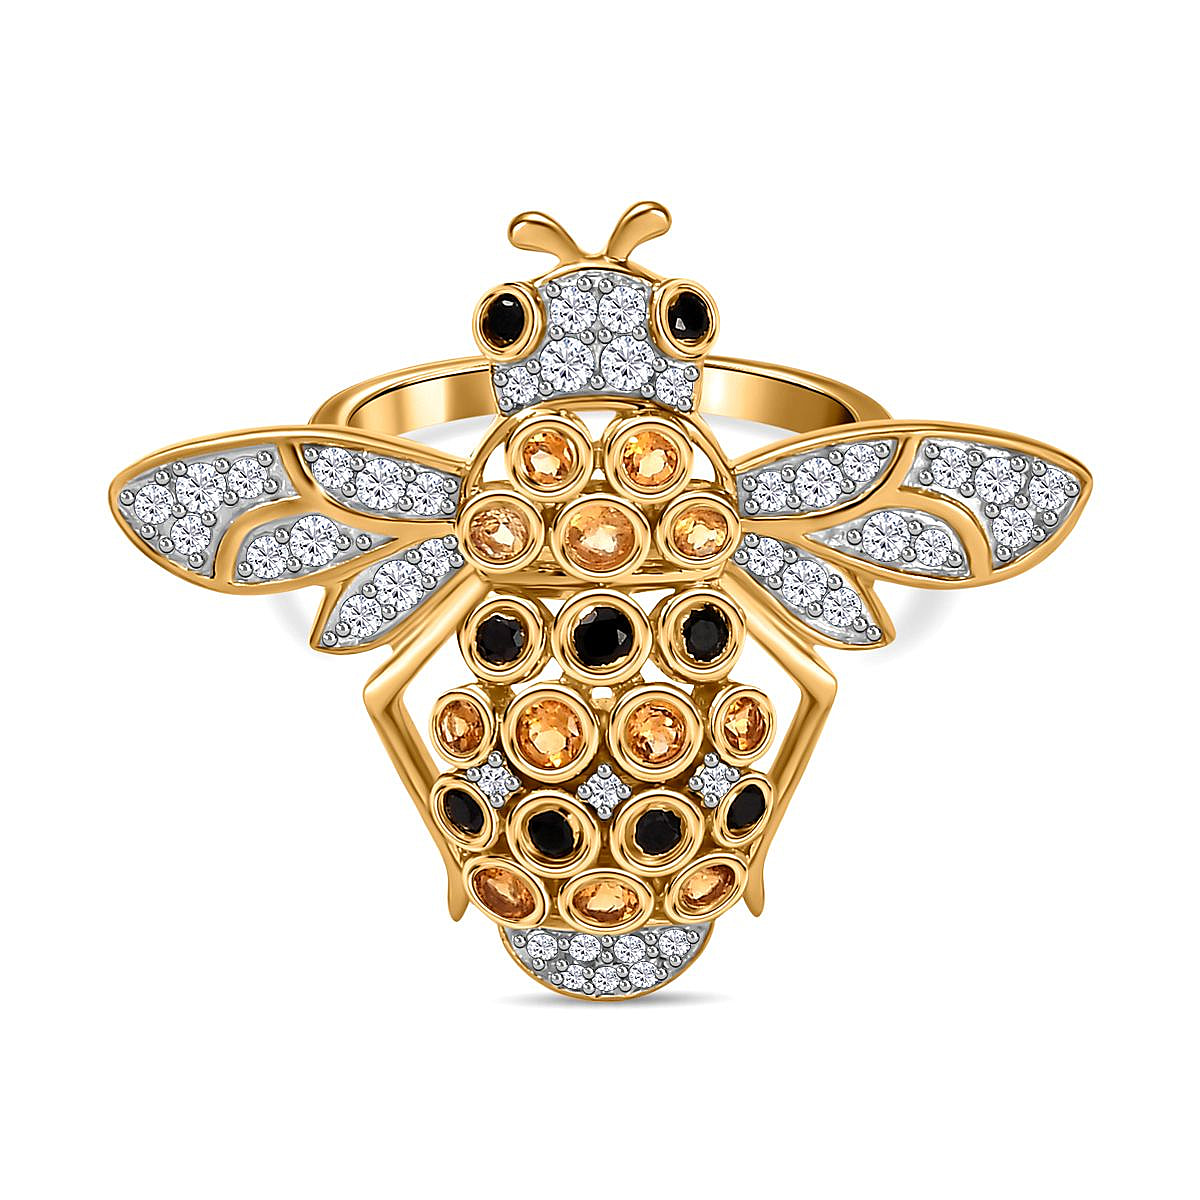 GP Honeycomb Collection - Citrine, Black Spinel & Zircon Ring in 18K Gold Vermeil Sterling Silver 1.28 Ct.